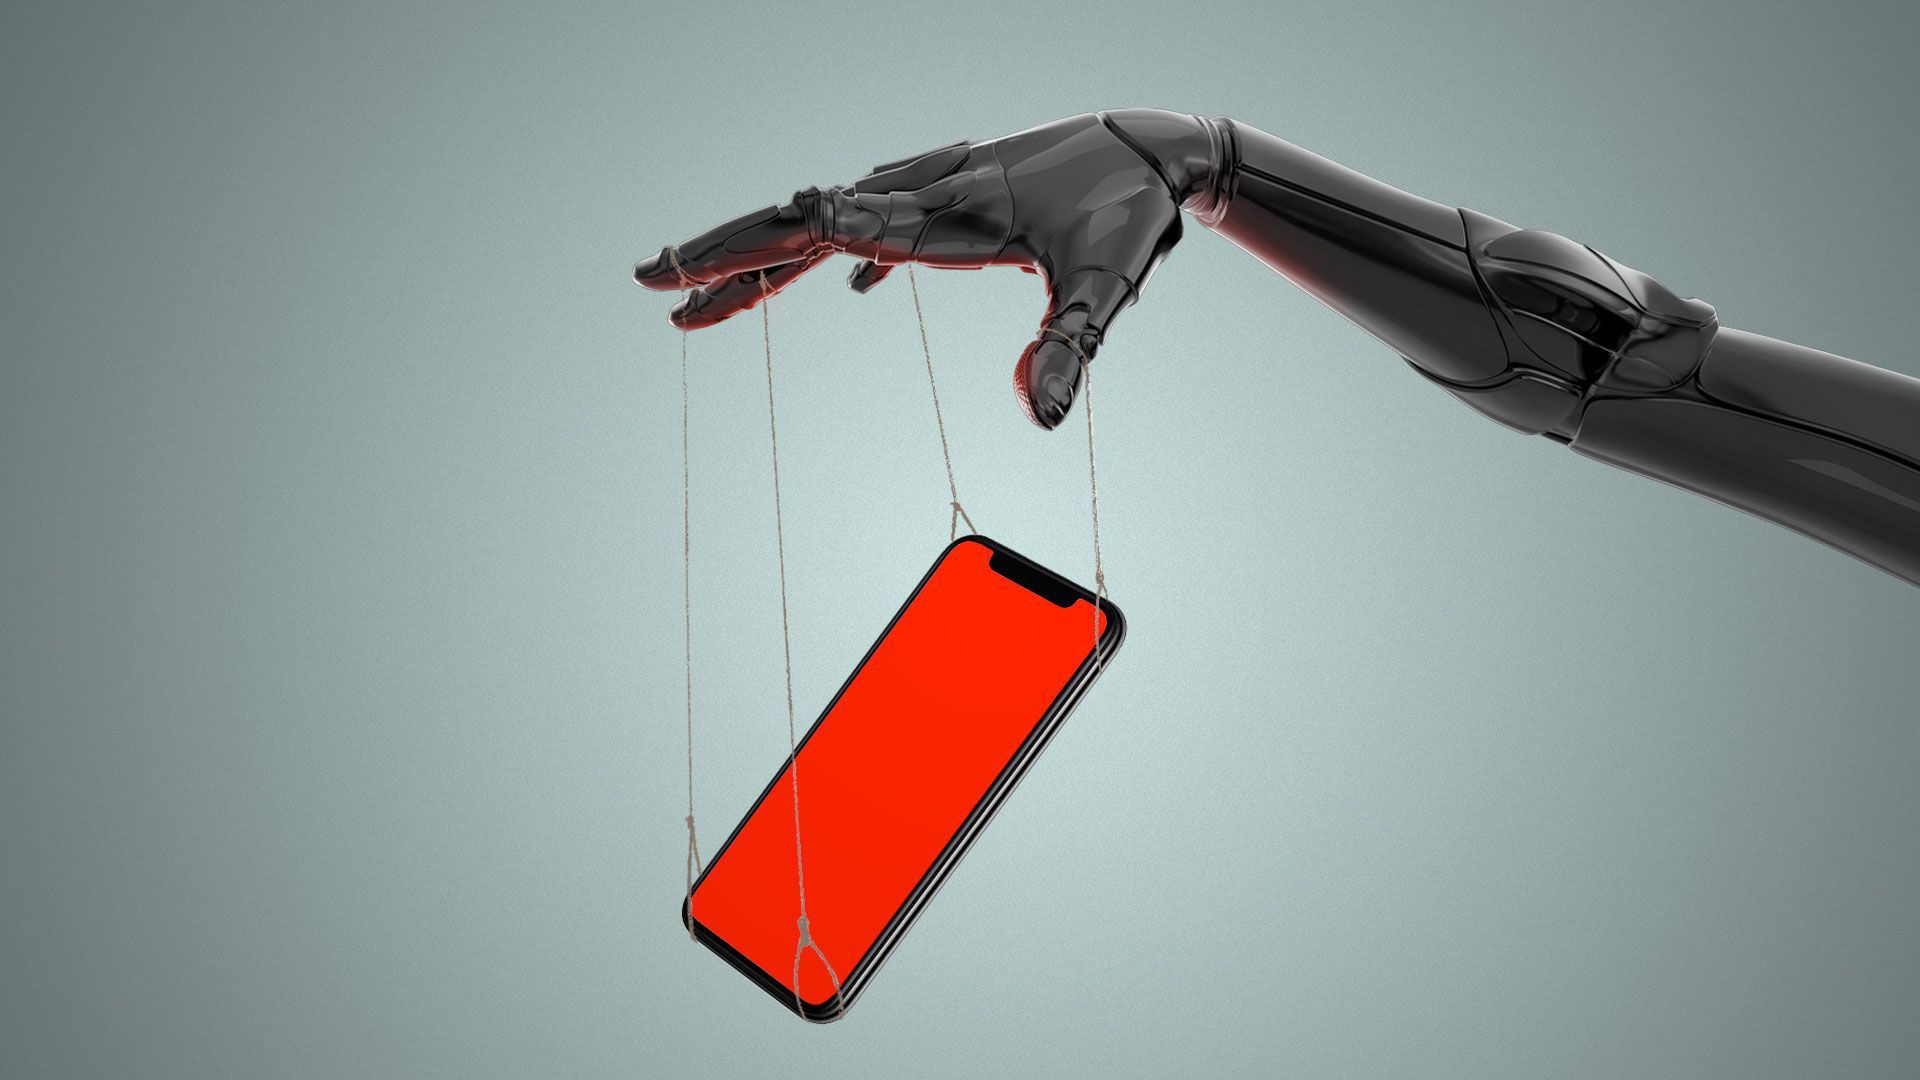 Illustration of a robot arm with the hand holding an iPhone on strings like a puppet.